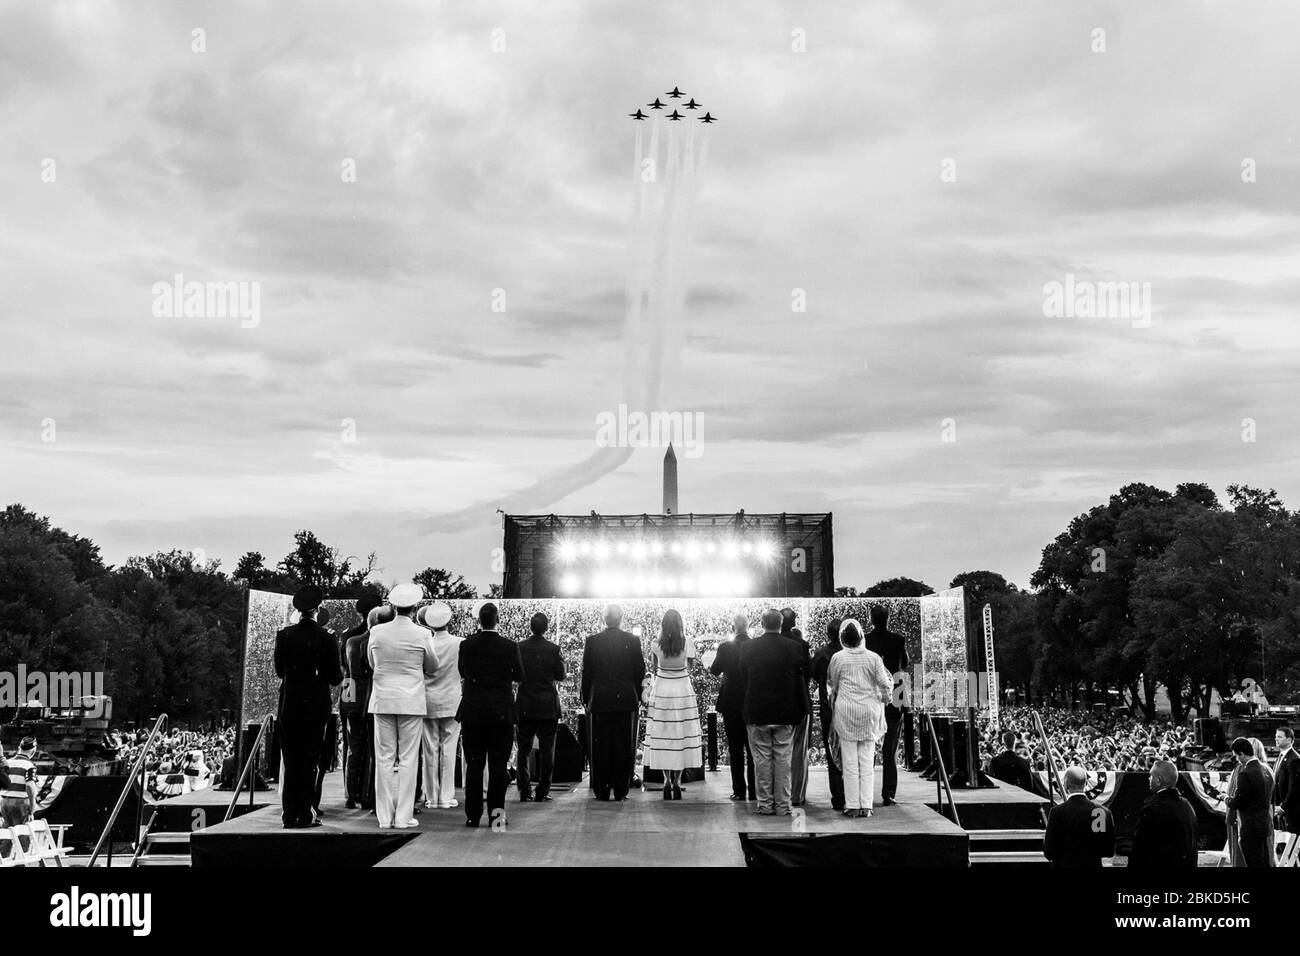 President Donald J. Trump and First Lady Melania Trump are joined onstage by Vice President Mike Pence, Second Lady Karen Pence, military leaders and Cabinet members as they watch the flyover of the United States Navy Blue Angels during the Salute to America event Thursday, July 4, 2019, at the Lincoln Memorial in Washington, D.C. Salute to America Stock Photo